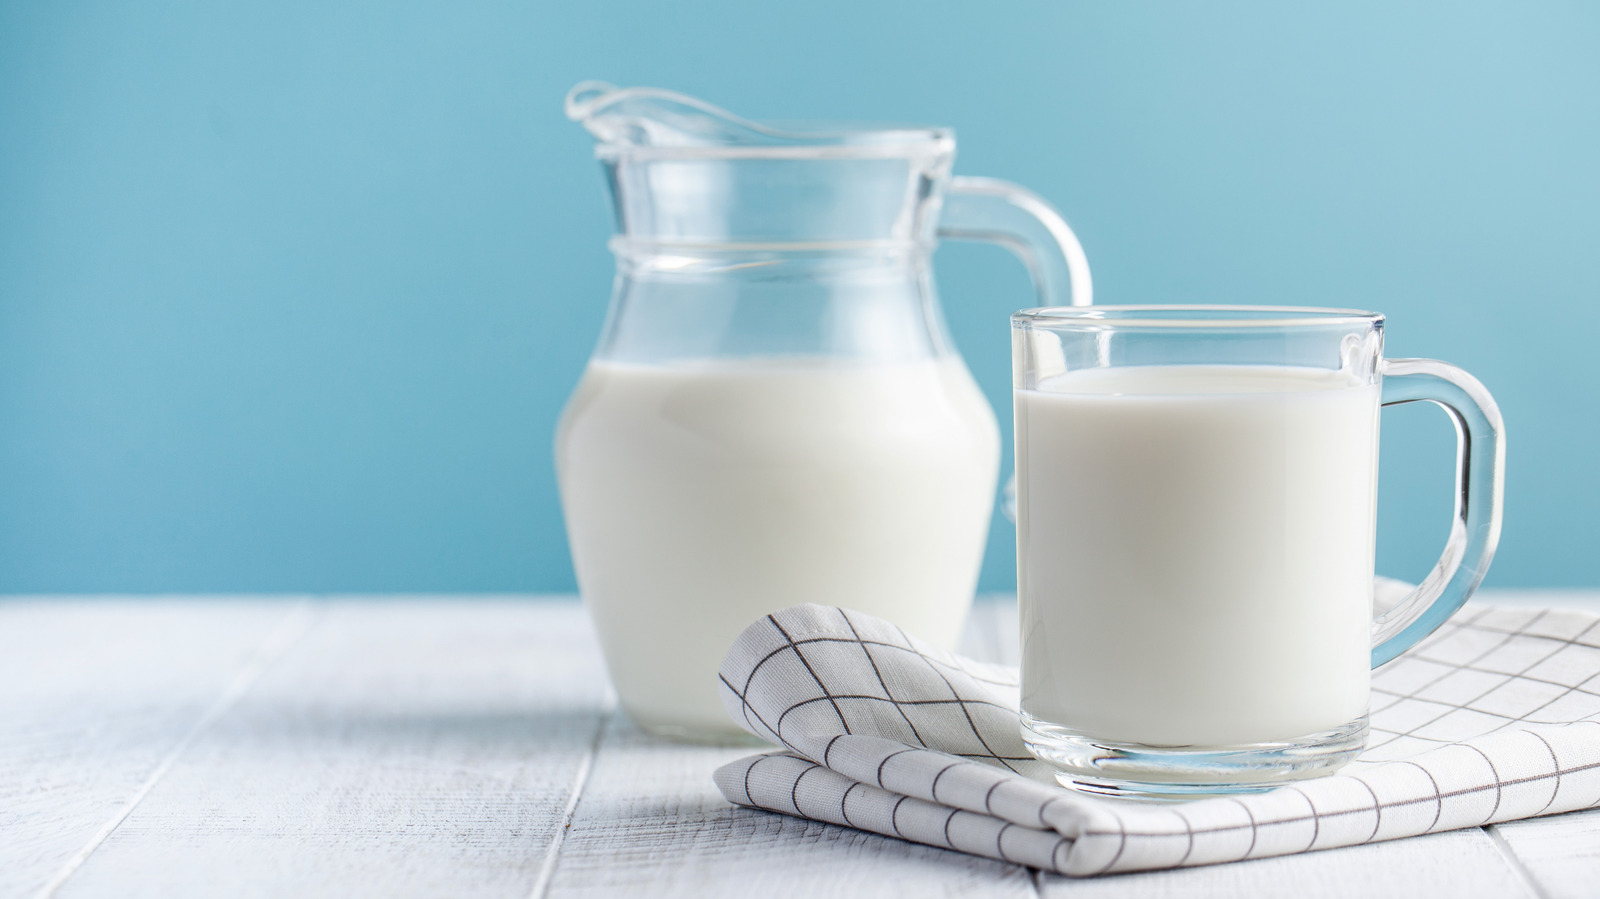 How Long Can Milk Be Left Out?